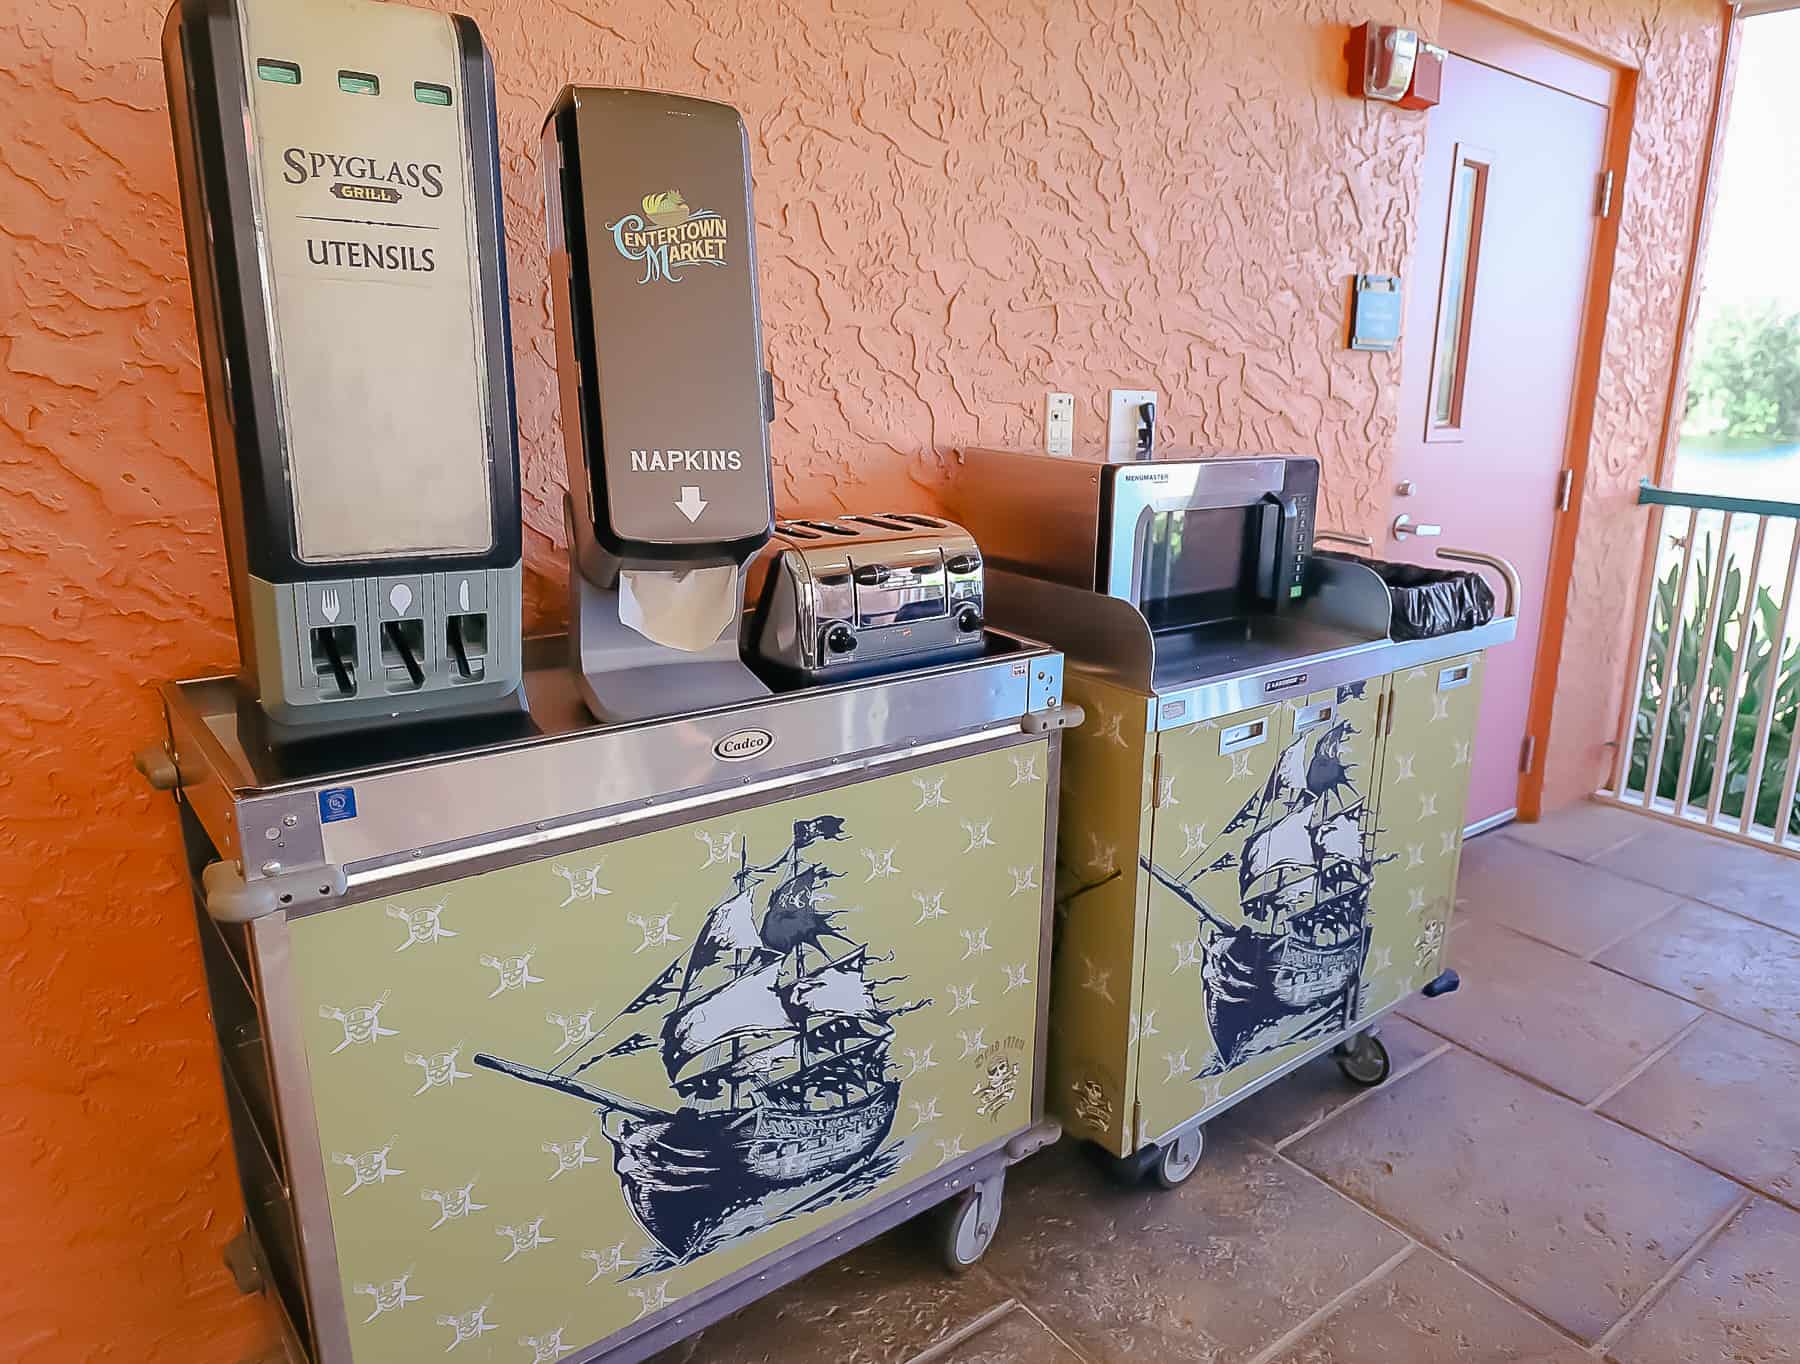 a microwave, toaster, and utensils available to guests at Spyglass Grill